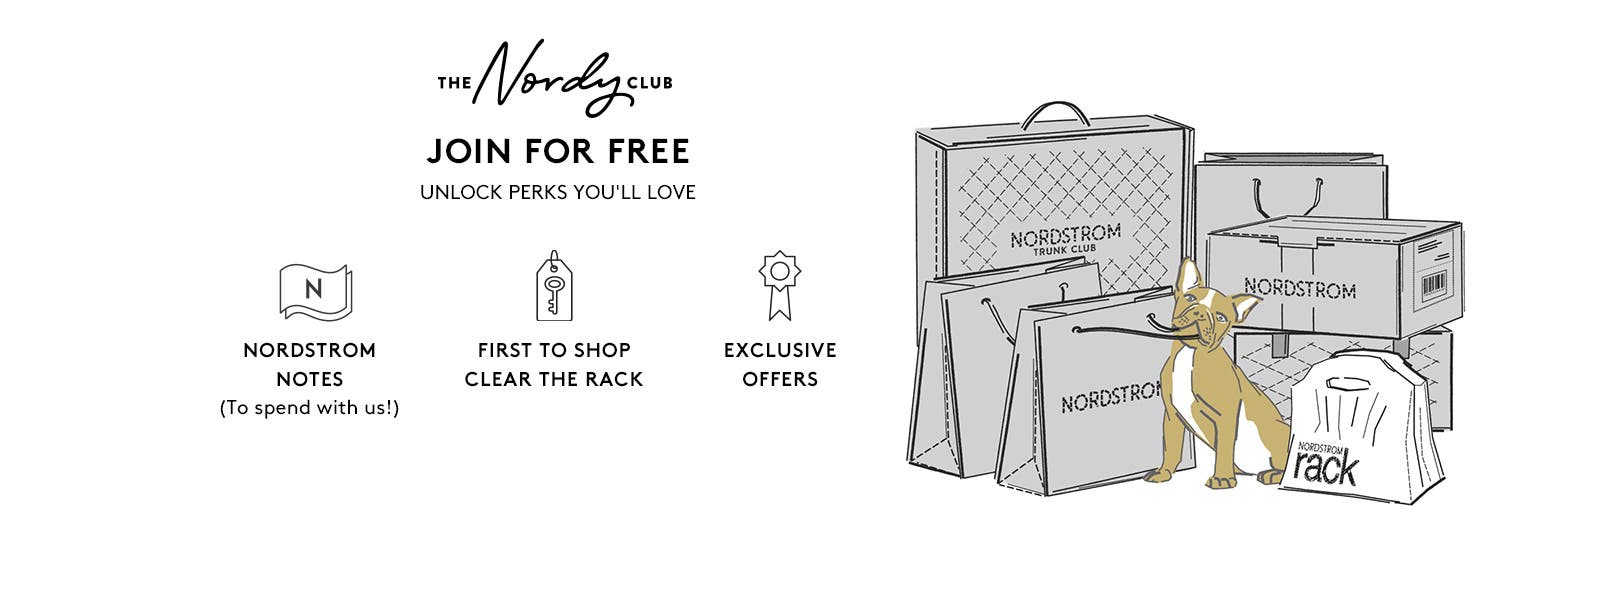 Join The Nordy Club for free to get Nordstrom Notes, First to Shop Clear the Rack access, and exclusive offers. Click to Join Now.